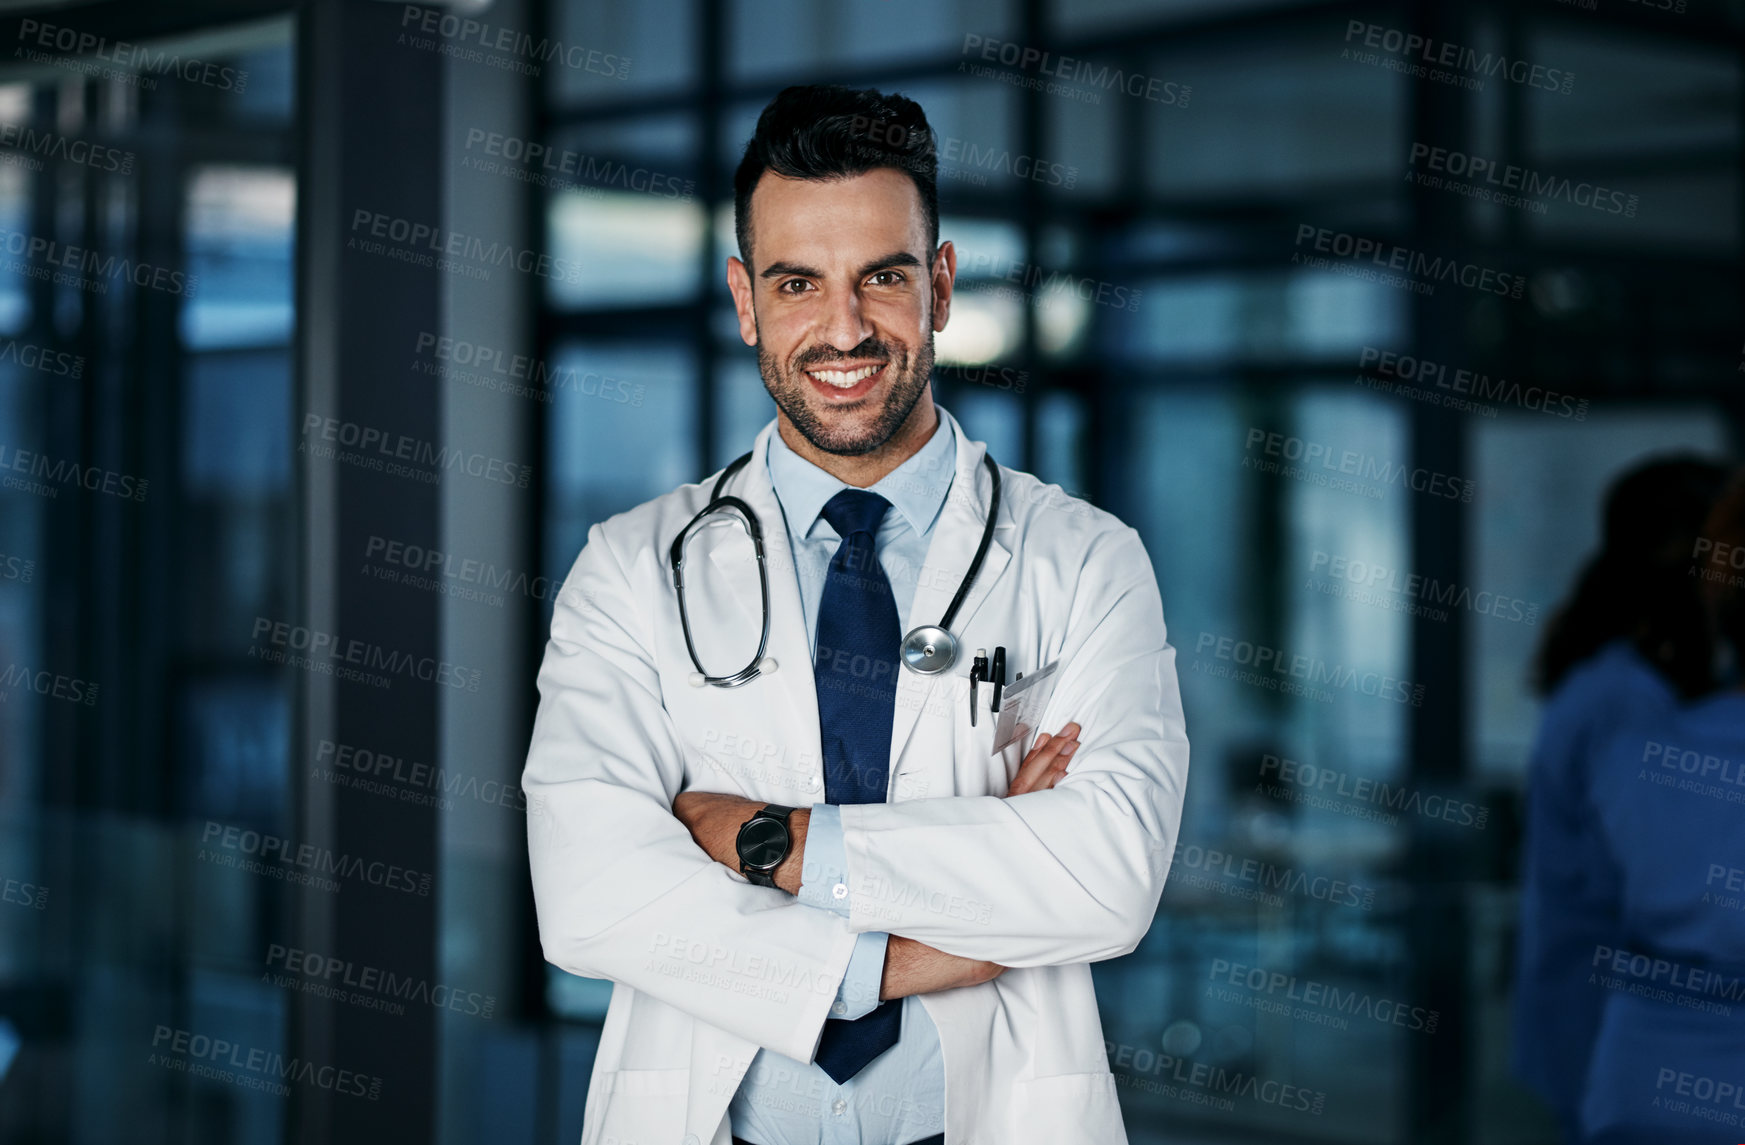 Buy stock photo Portrait of a confident young doctor working in a hospital